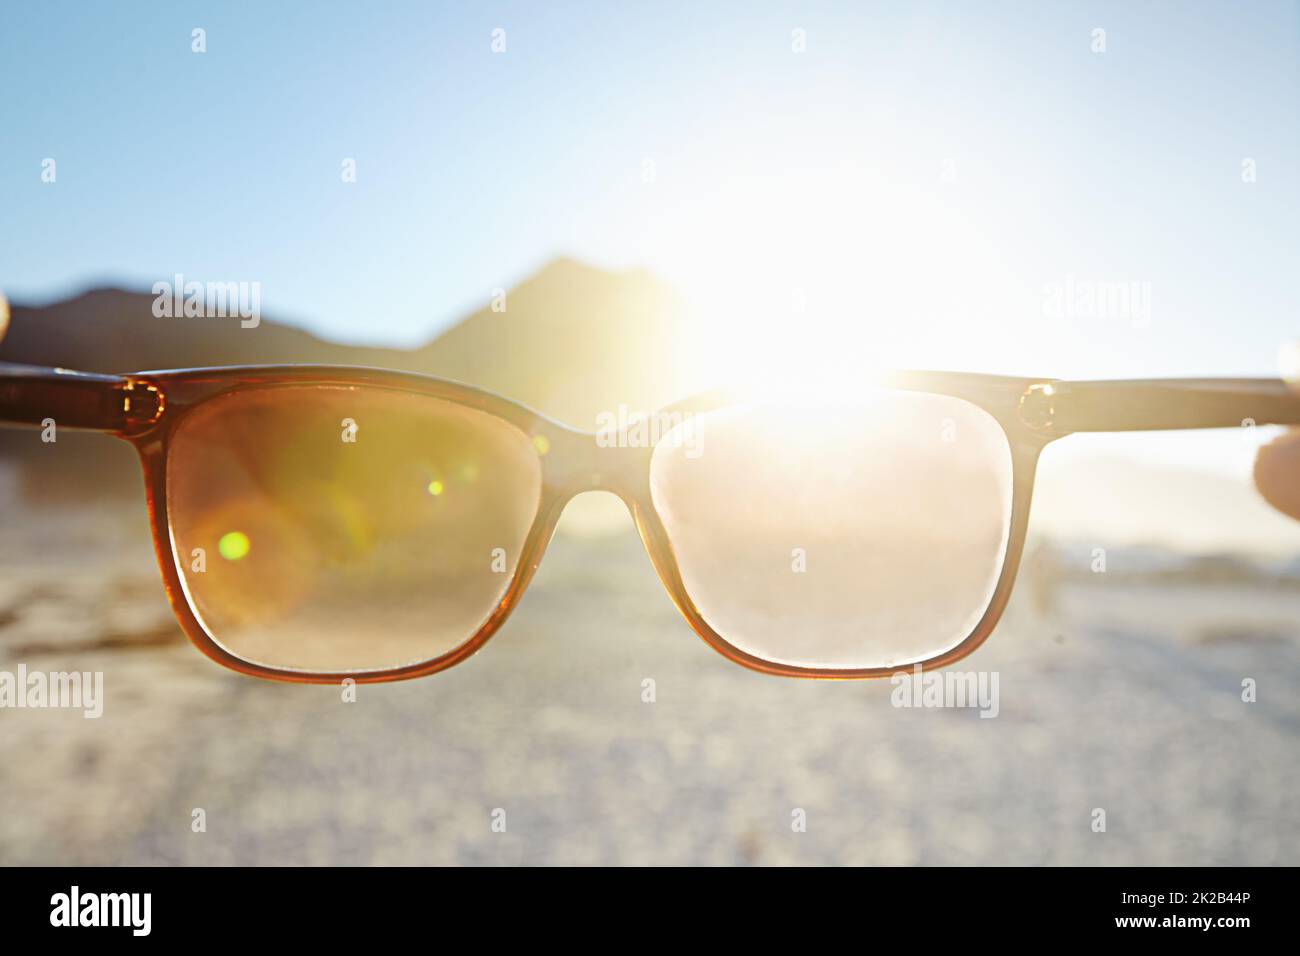 Download Beach, Sunglasses, Glasses. Royalty-Free Stock